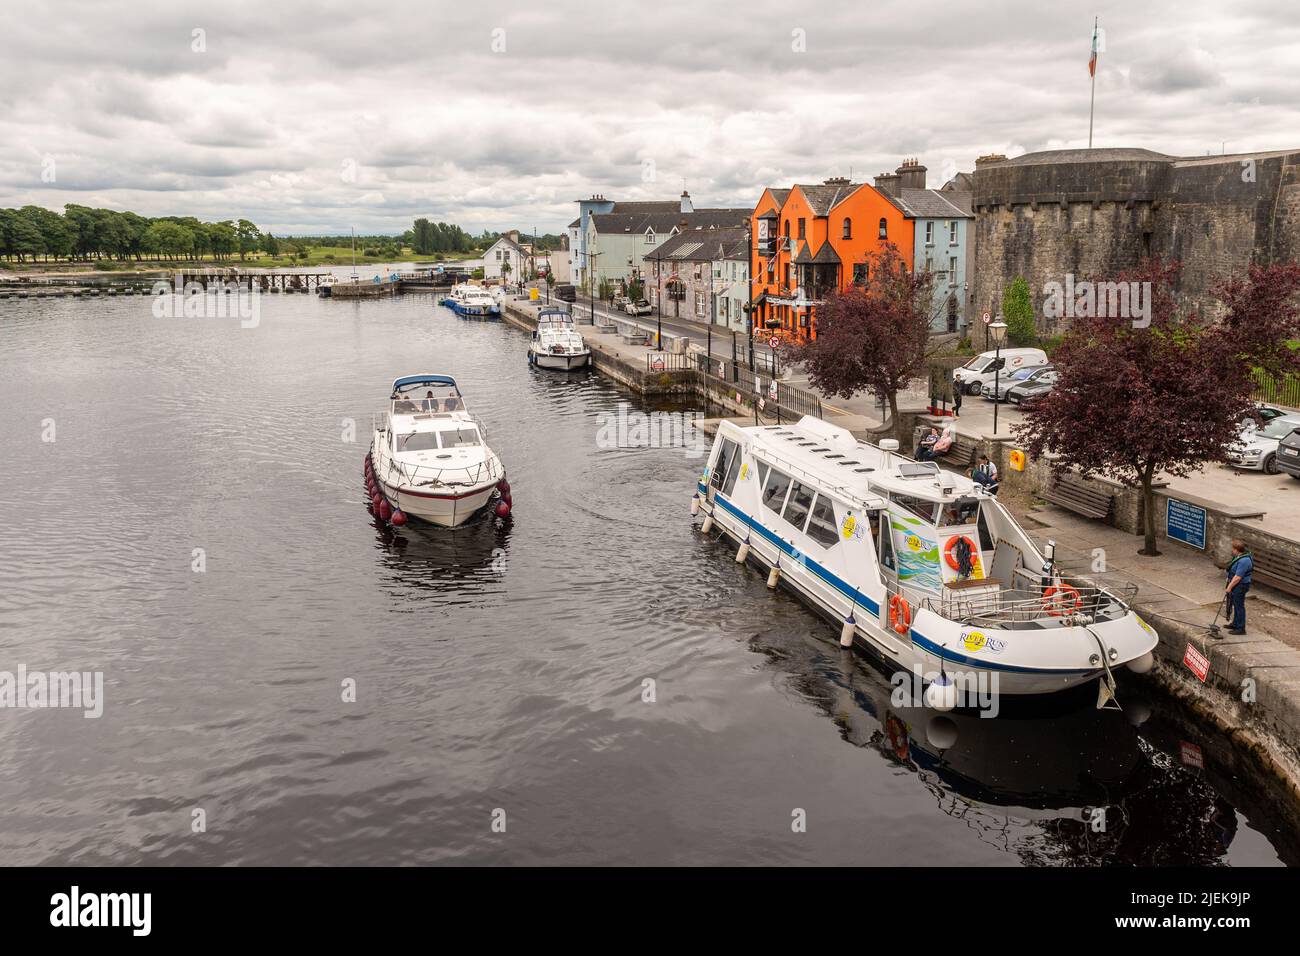 Motor cruisers on the River Shannon on an overcast day in Athlone, Co. Westmeath, Ireland. Stock Photo